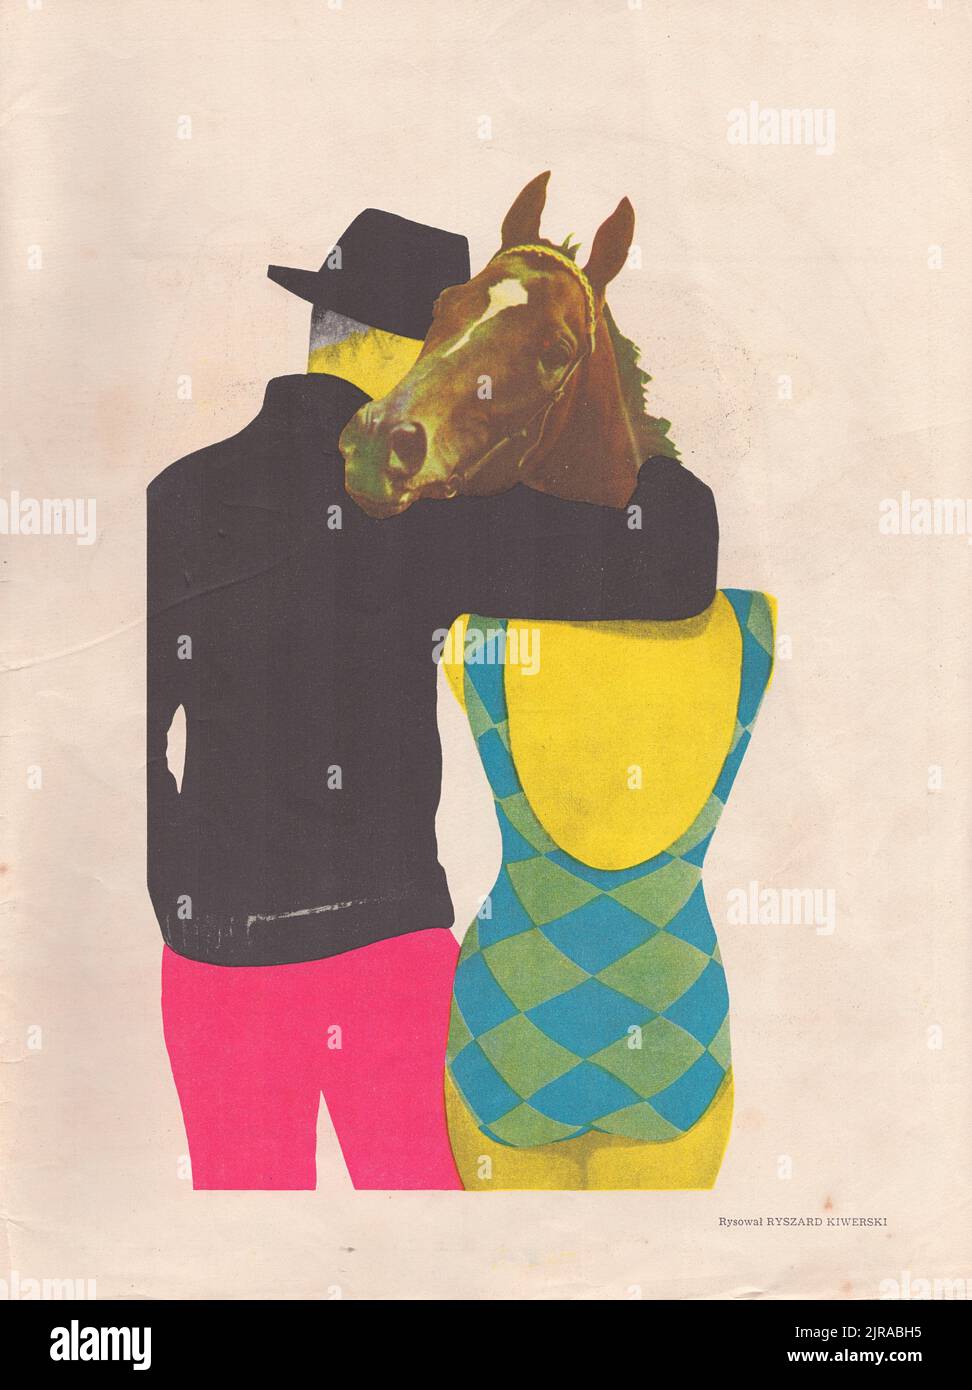 Man with a woman with a horse head swimming suit Stock Photo